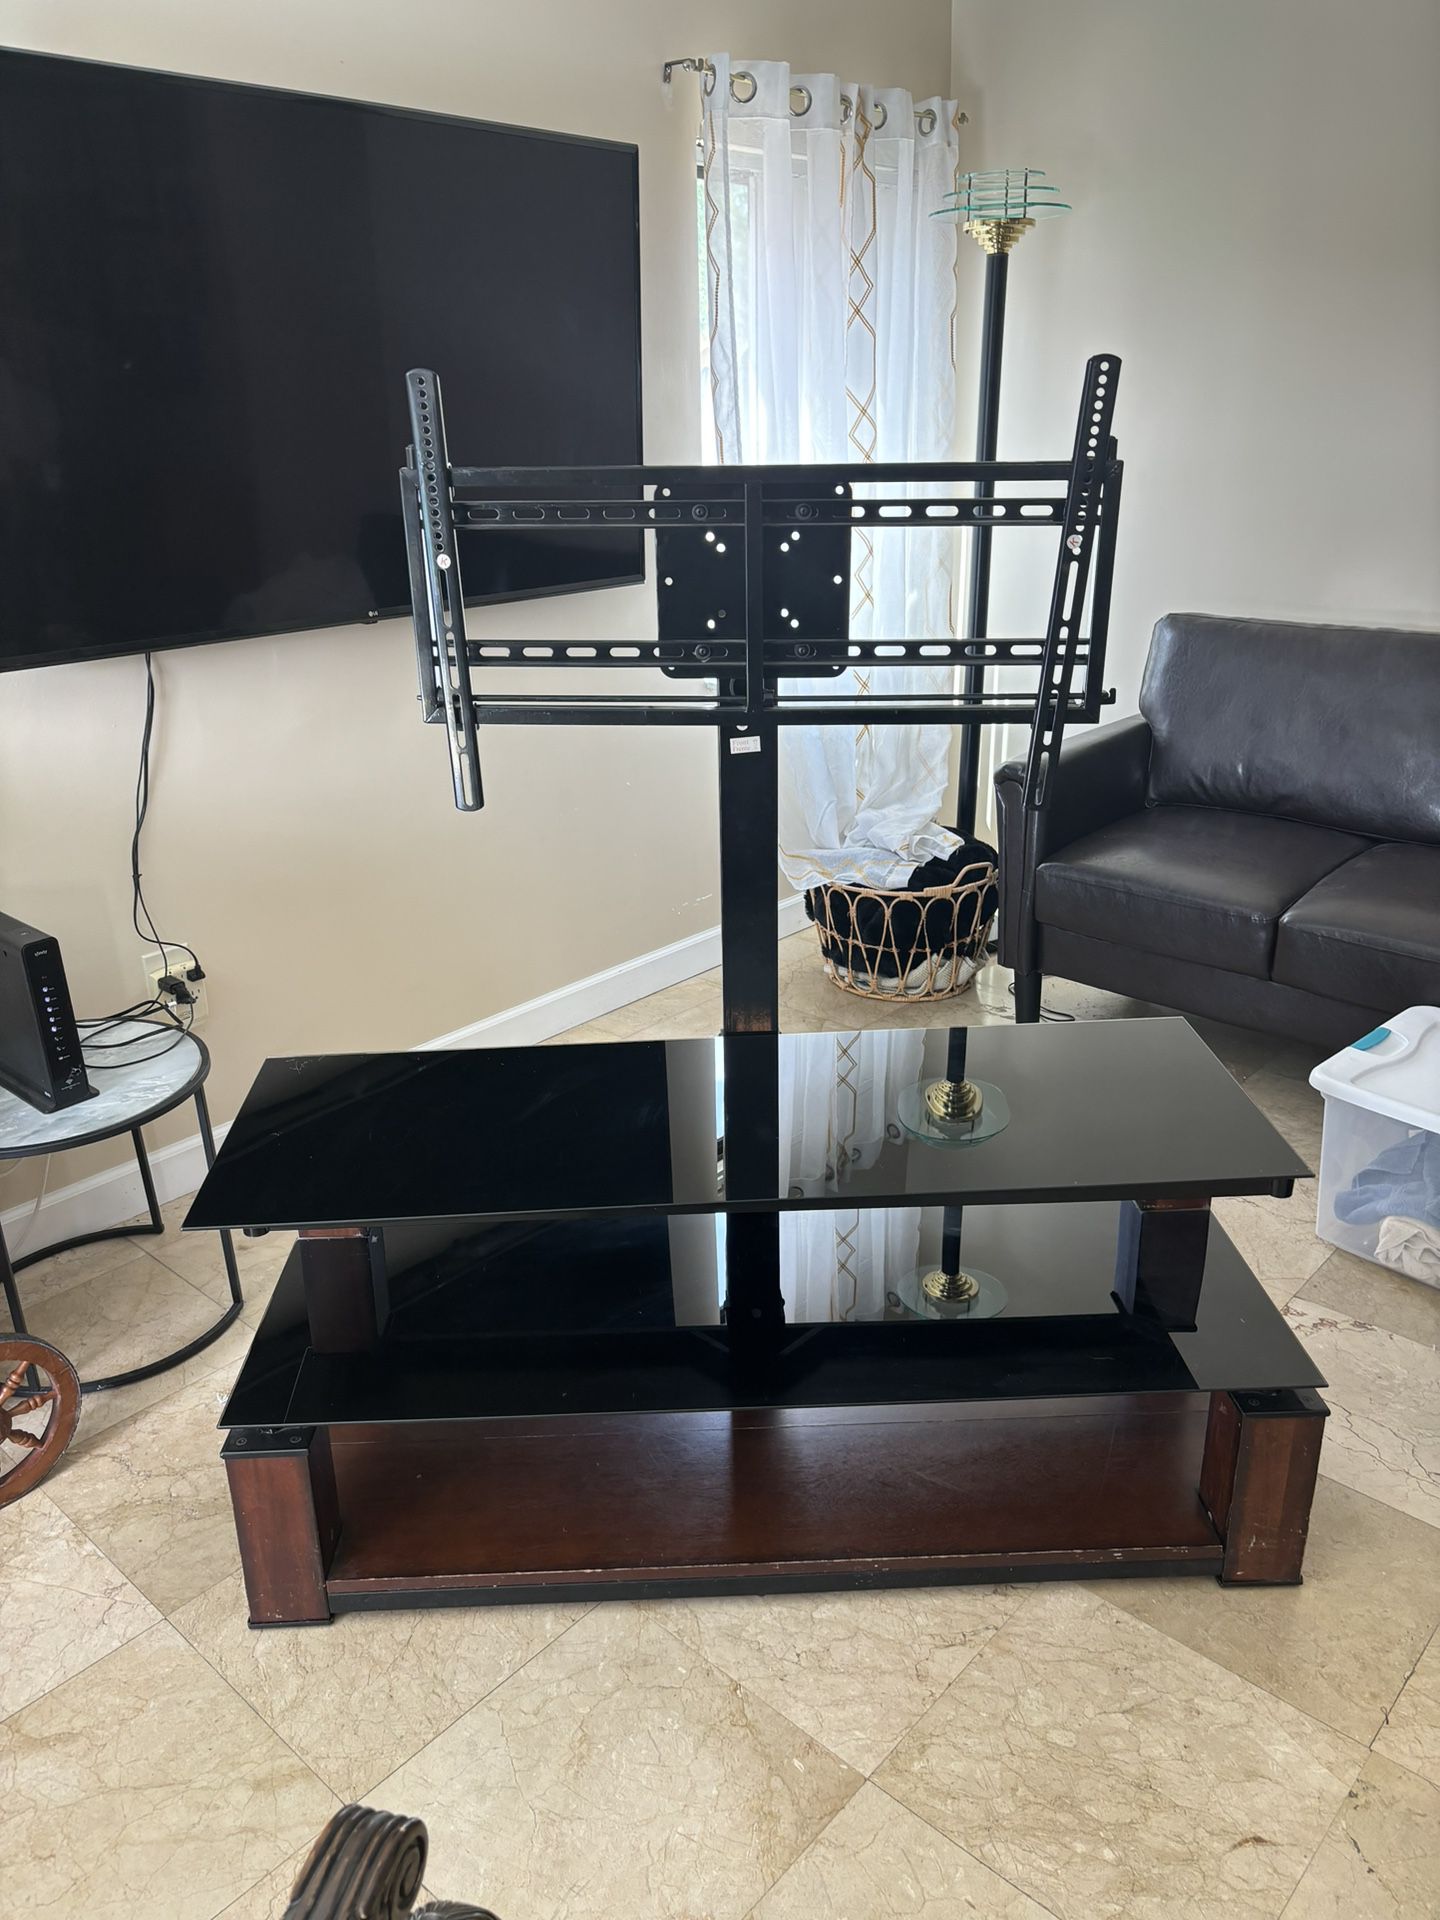 TV console with stand to the TV